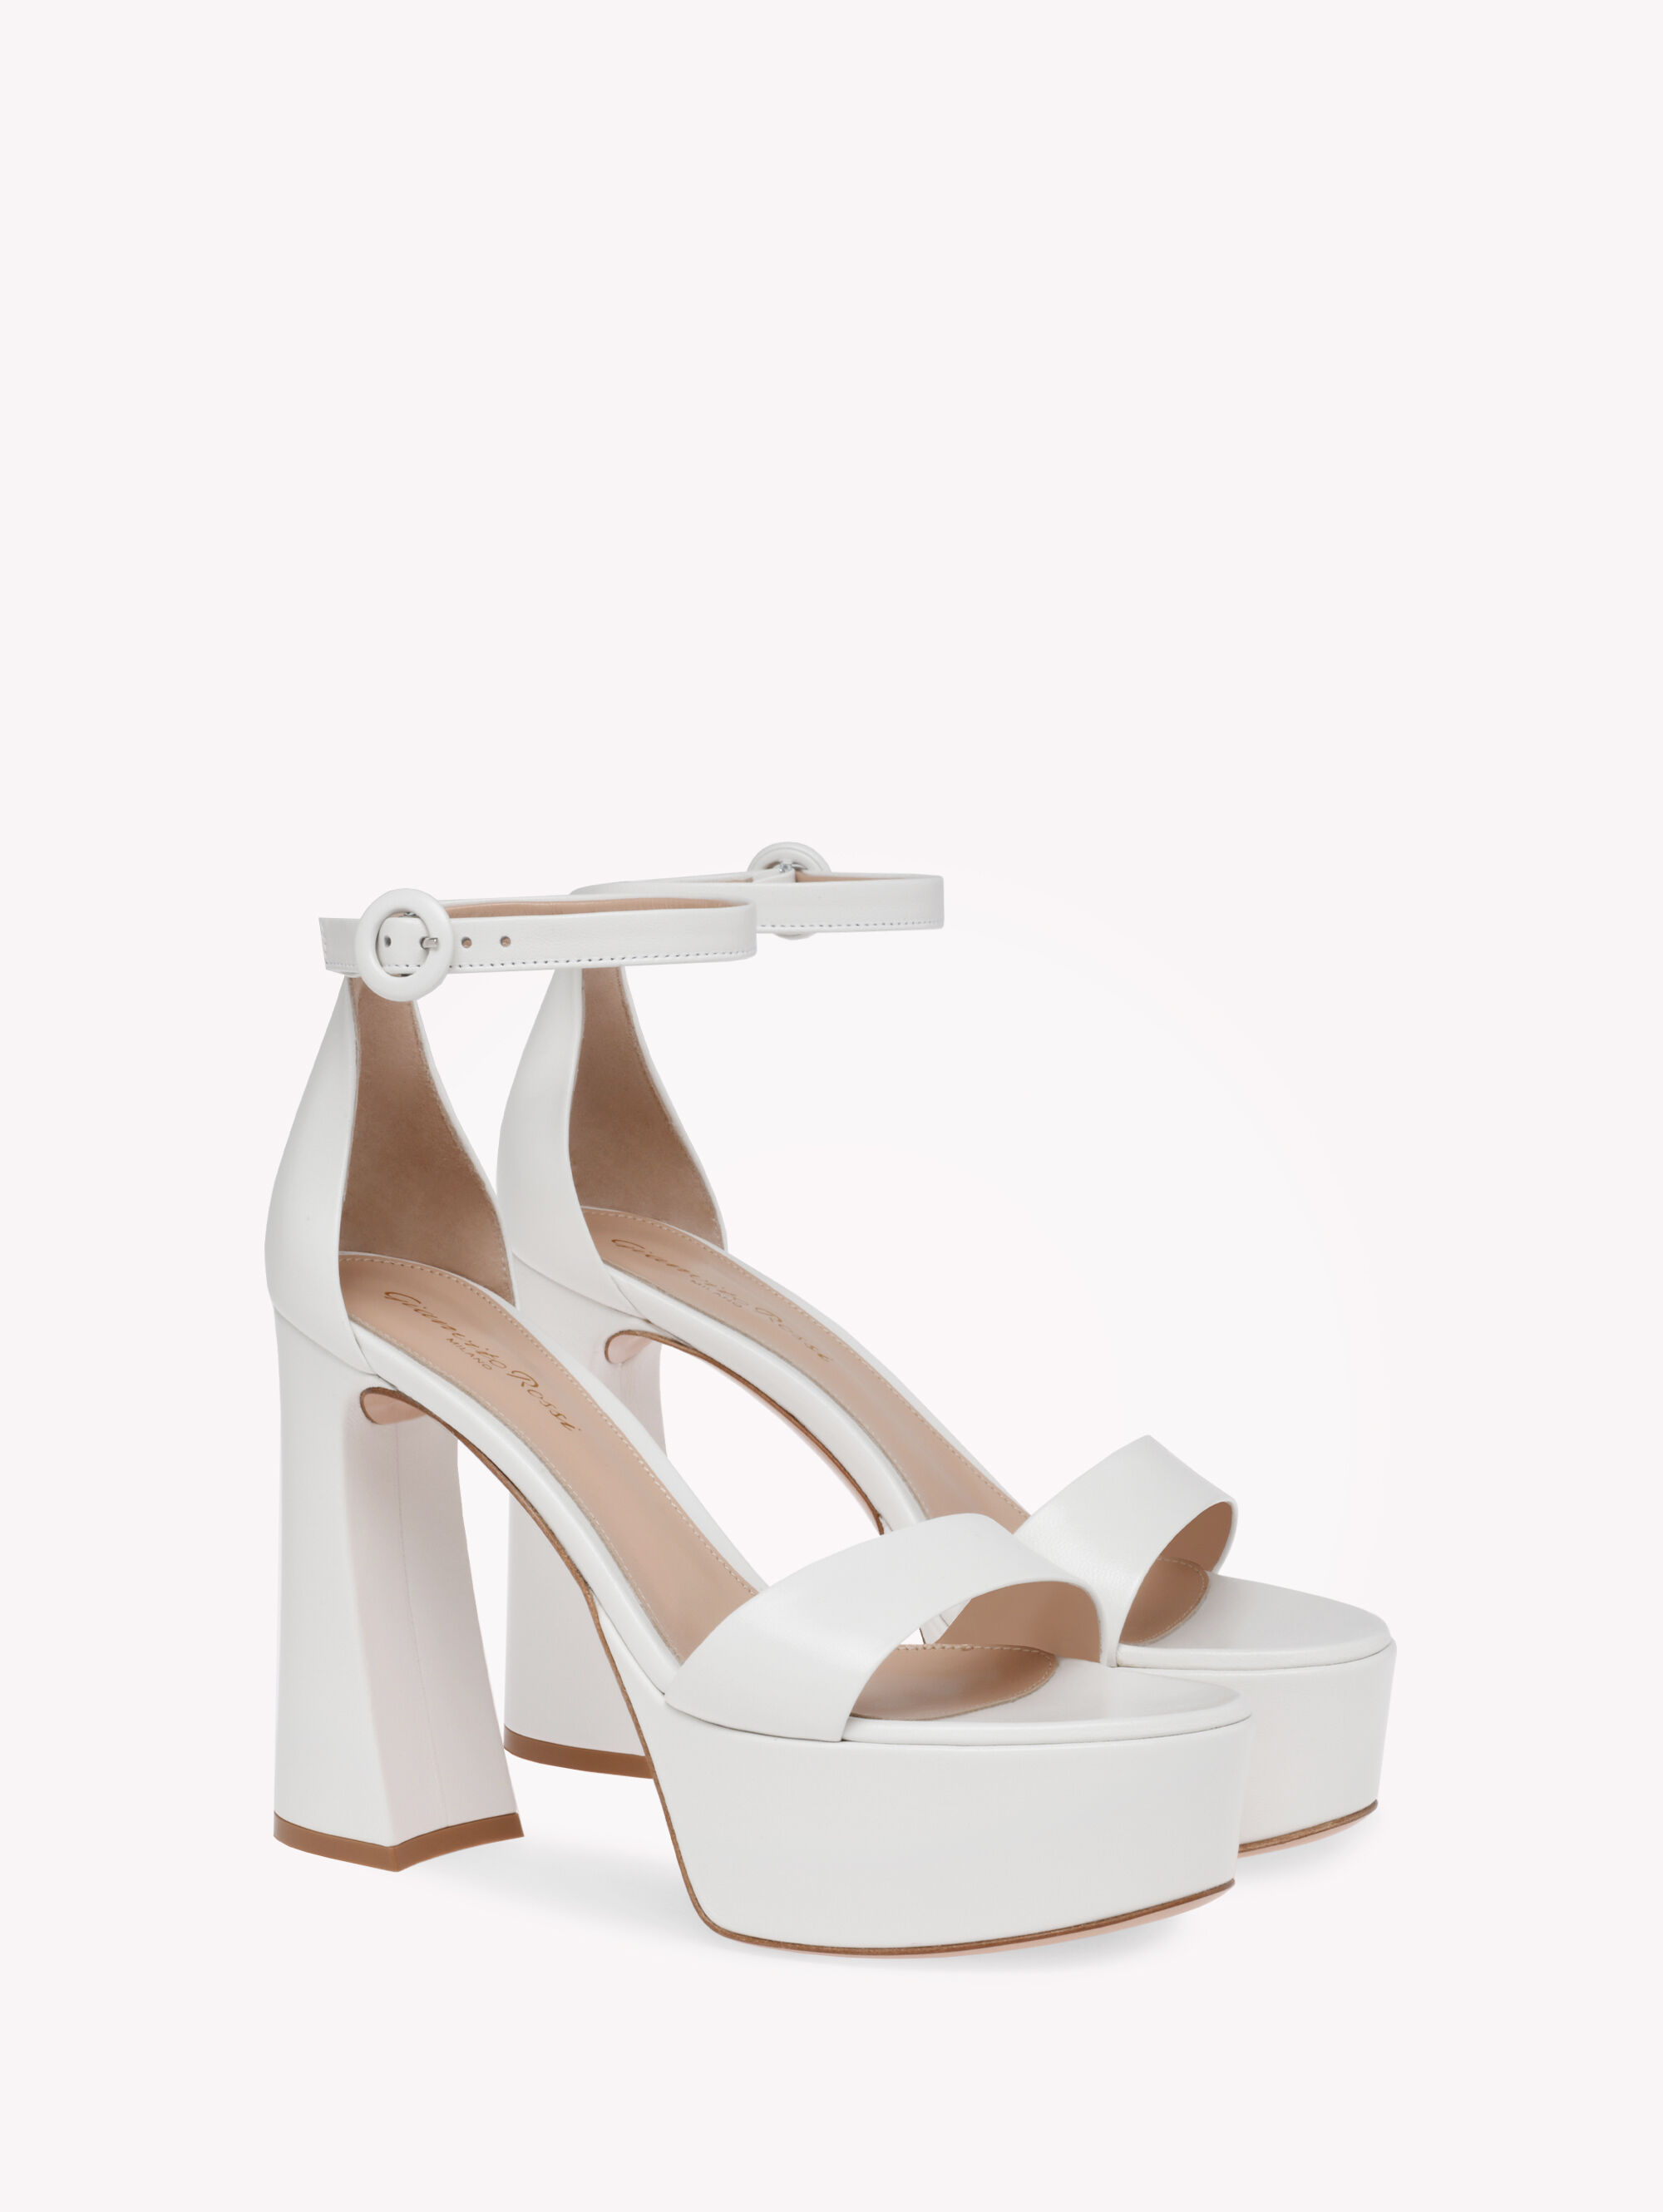 Sandals HOLLY| Gianvito Rossi